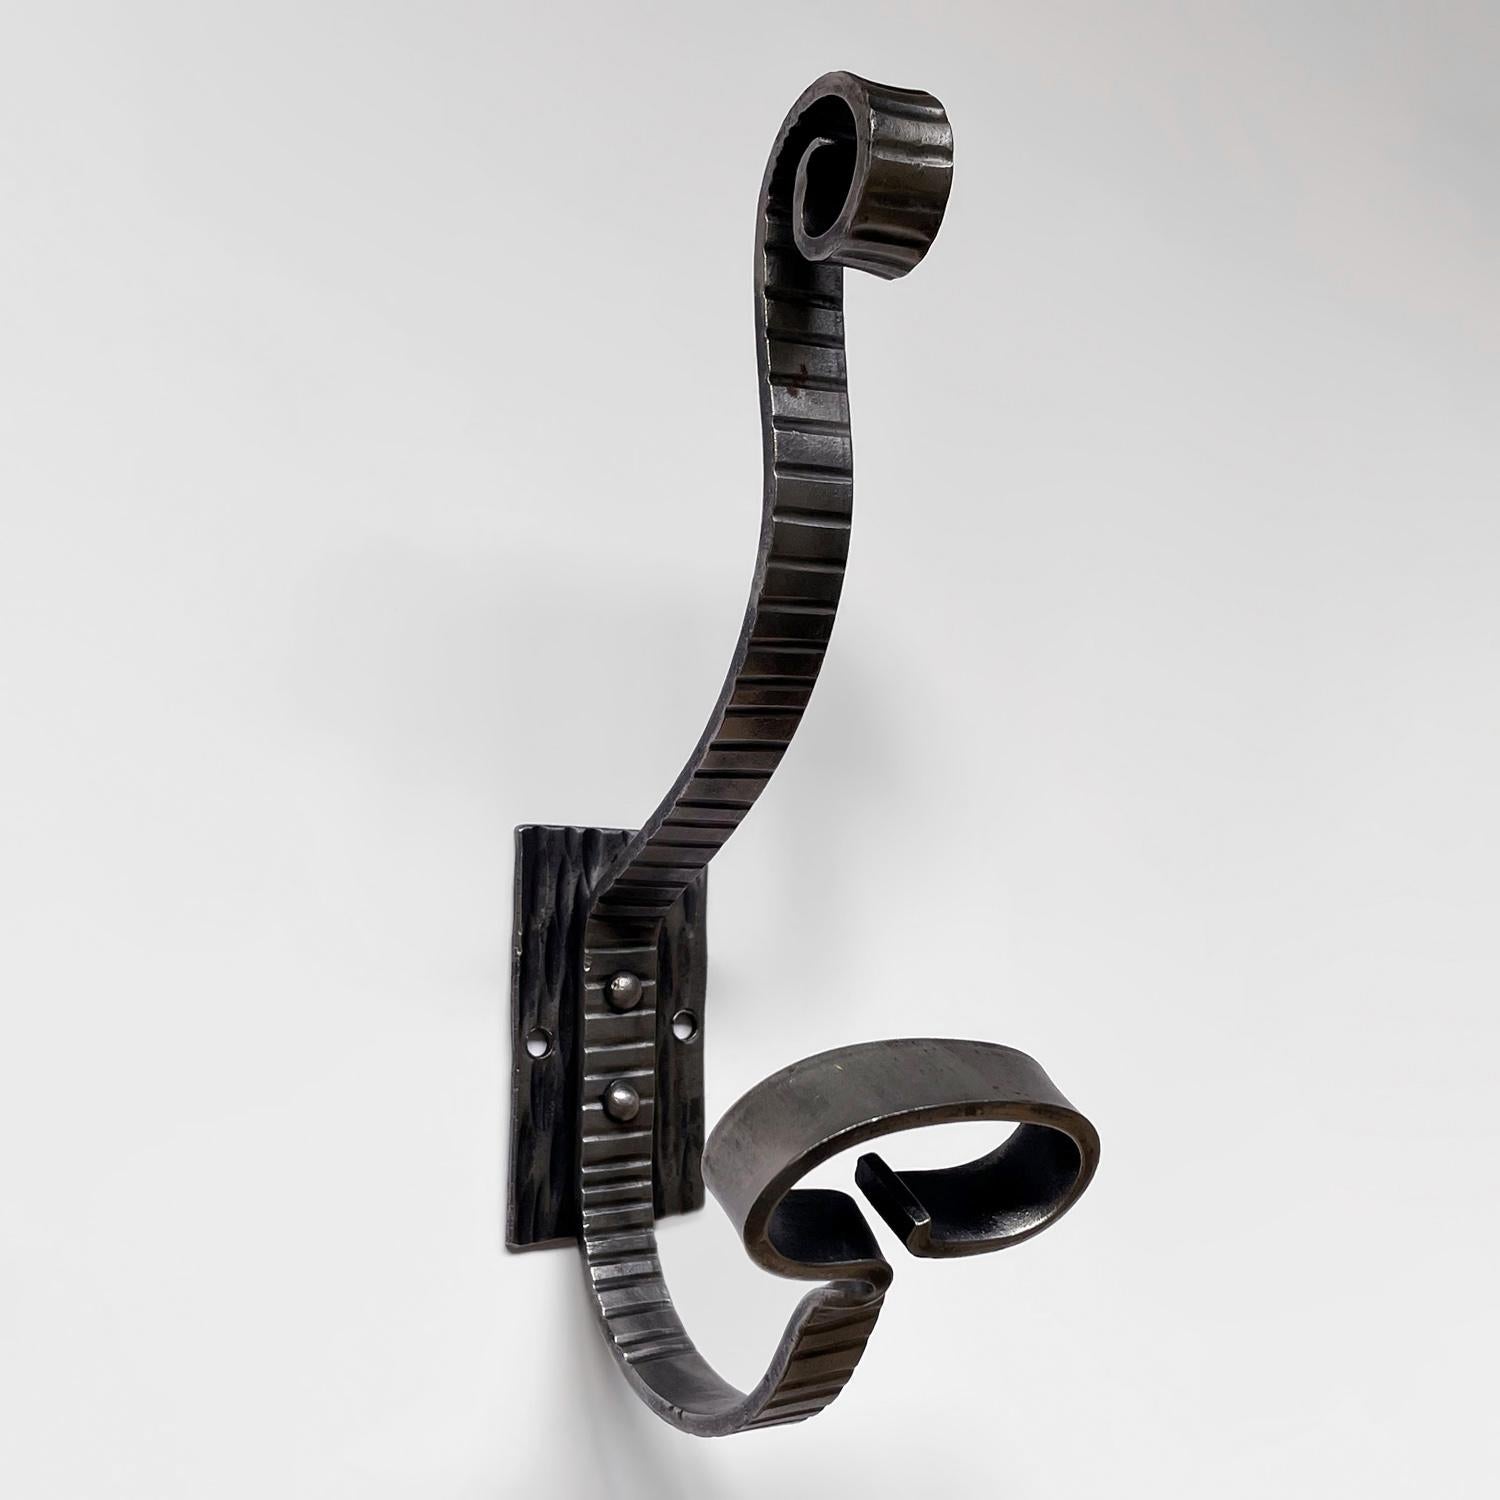 French etched iron double wall hook
France, mid century
Beautifully sculpted flat iron J hook finished with curved iron detailing
Wide loop lower hook and spiraled iron upper hook
This piece has many fun details including the intricate etched